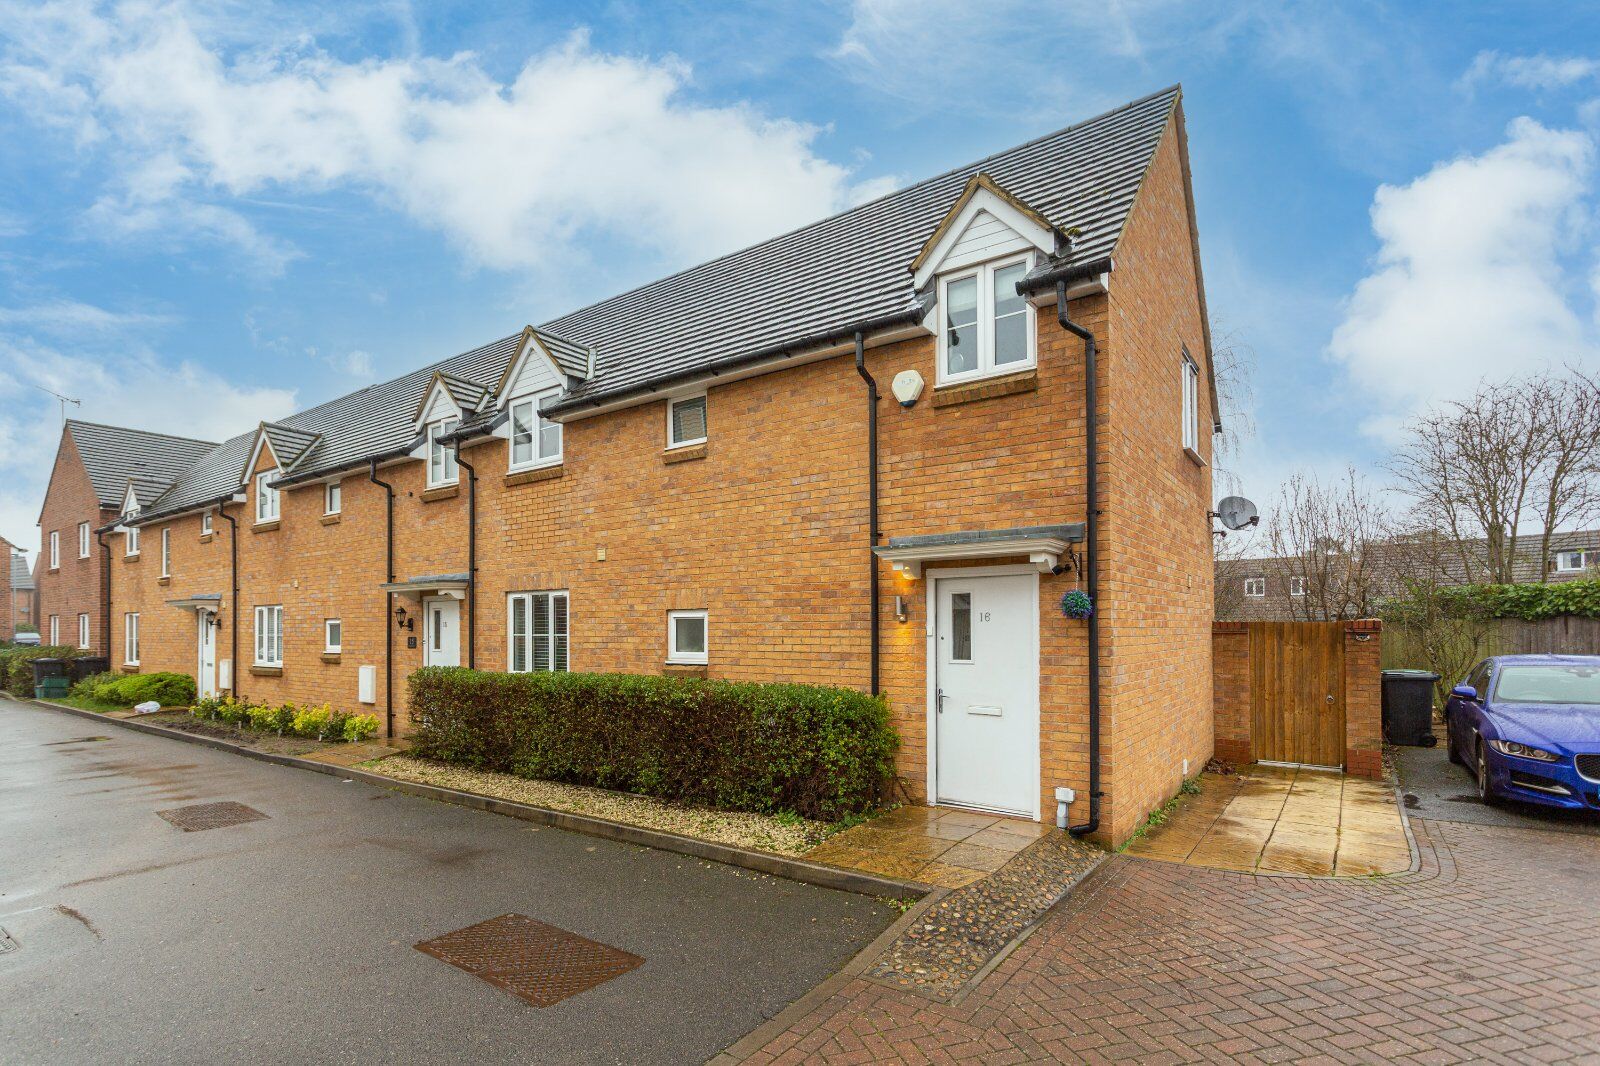 2 bedroom end terraced house for sale Old School Drive, Wheathampstead, AL4, main image